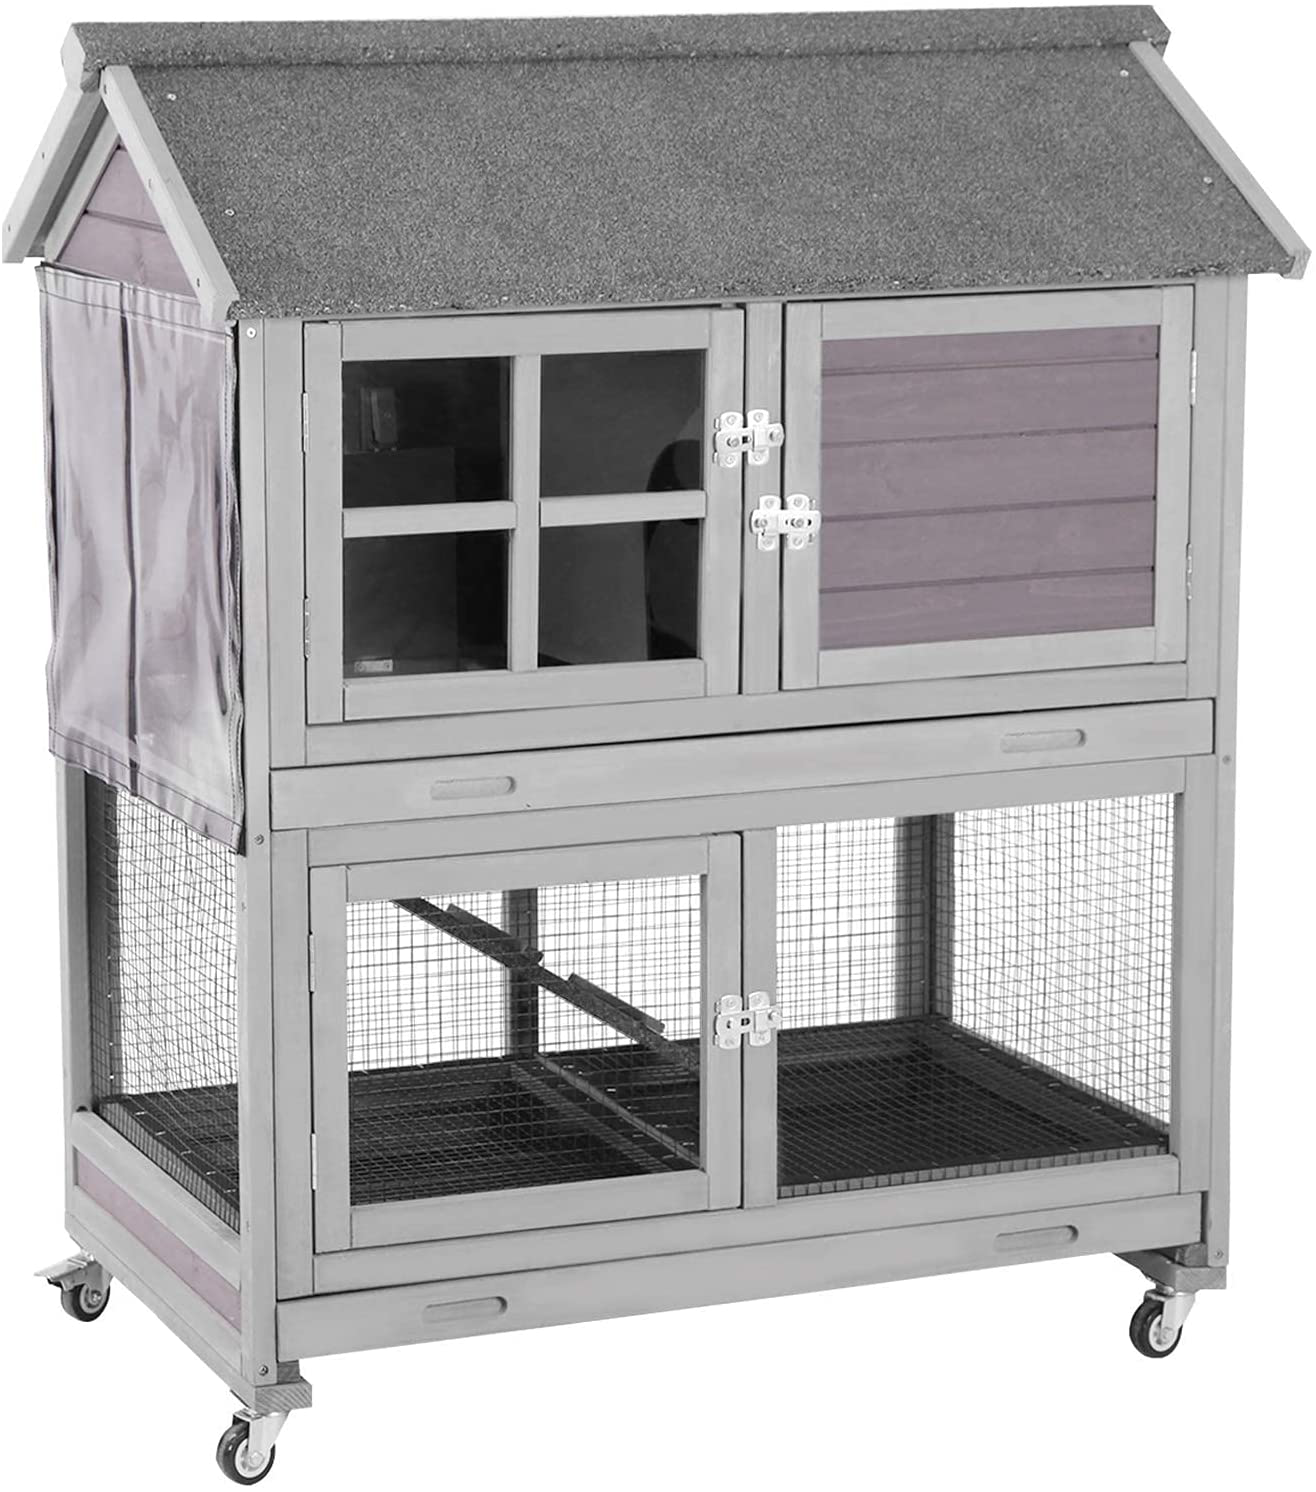 Rabbit Hutch Indoor Rabbit Cage for Small Animals Outdoor Bunny Cage with Movable Wire Netting, Guinea Pig Habitat on Wheels,Pull Out Leak Proof Tray (Grey+Camel)